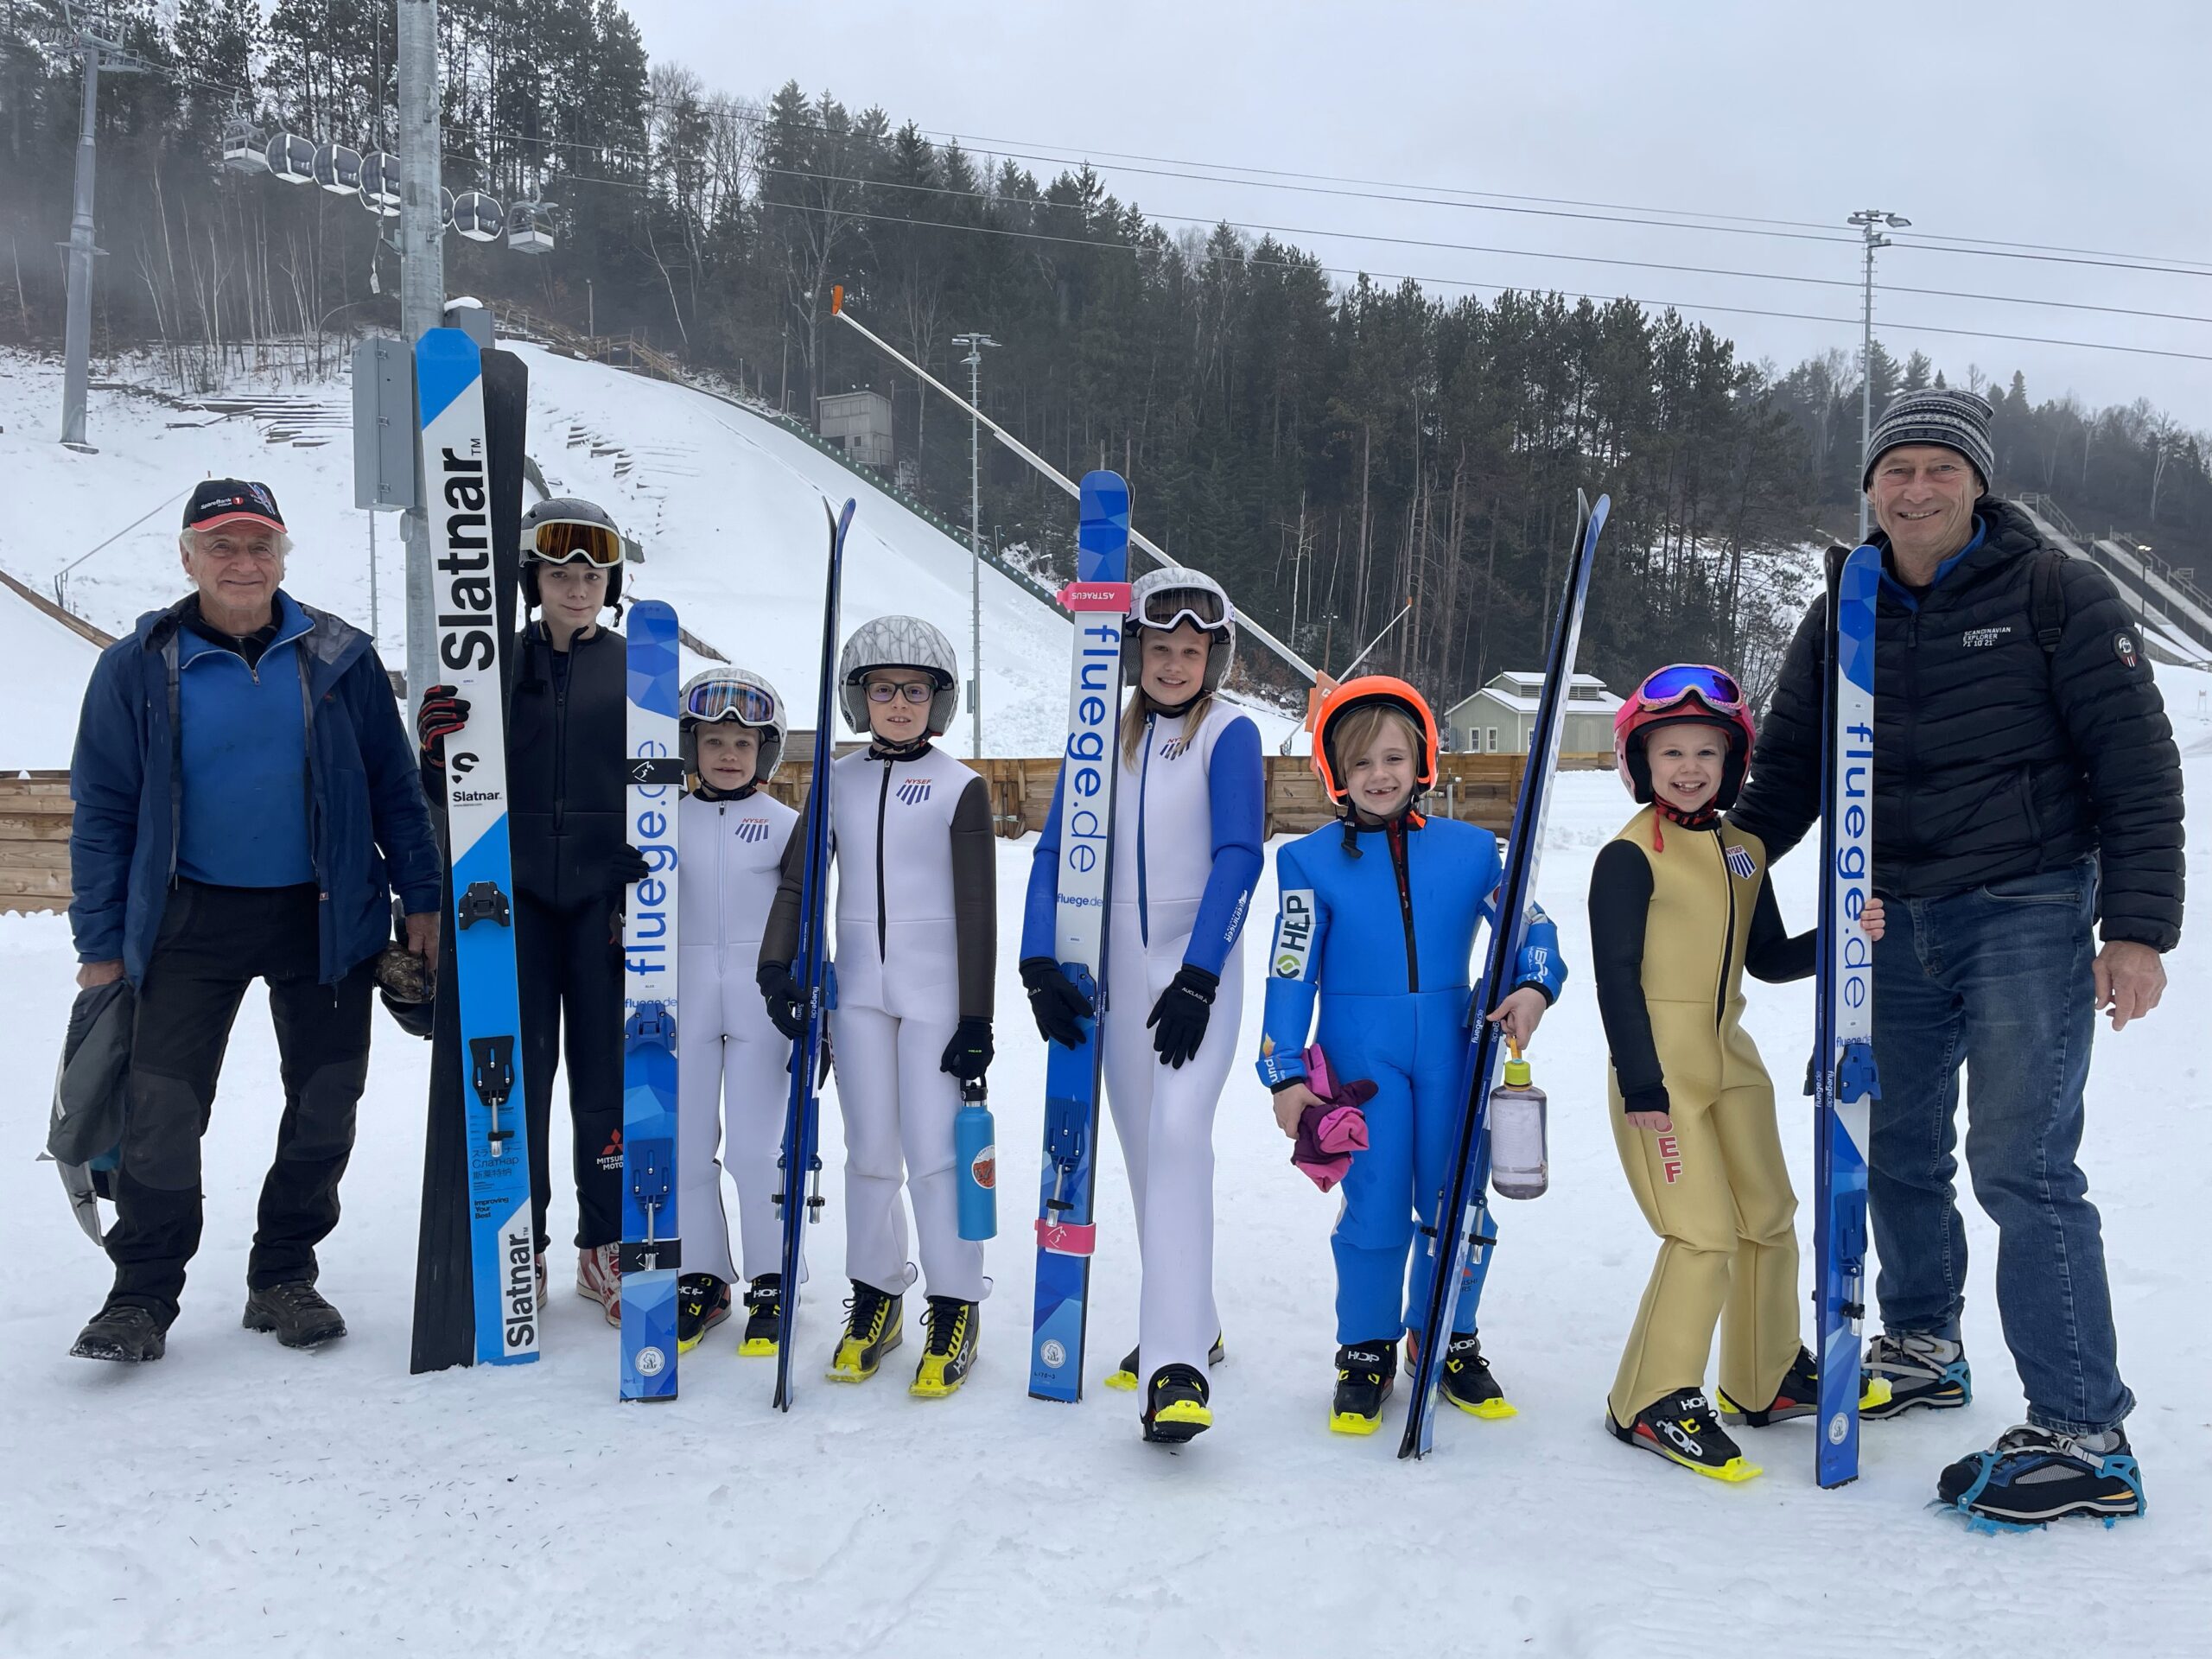 NYSEF received a grant from the North Elba LEAF to support the purchase of new ski jumping gear for young athletes interested in learning the sport.